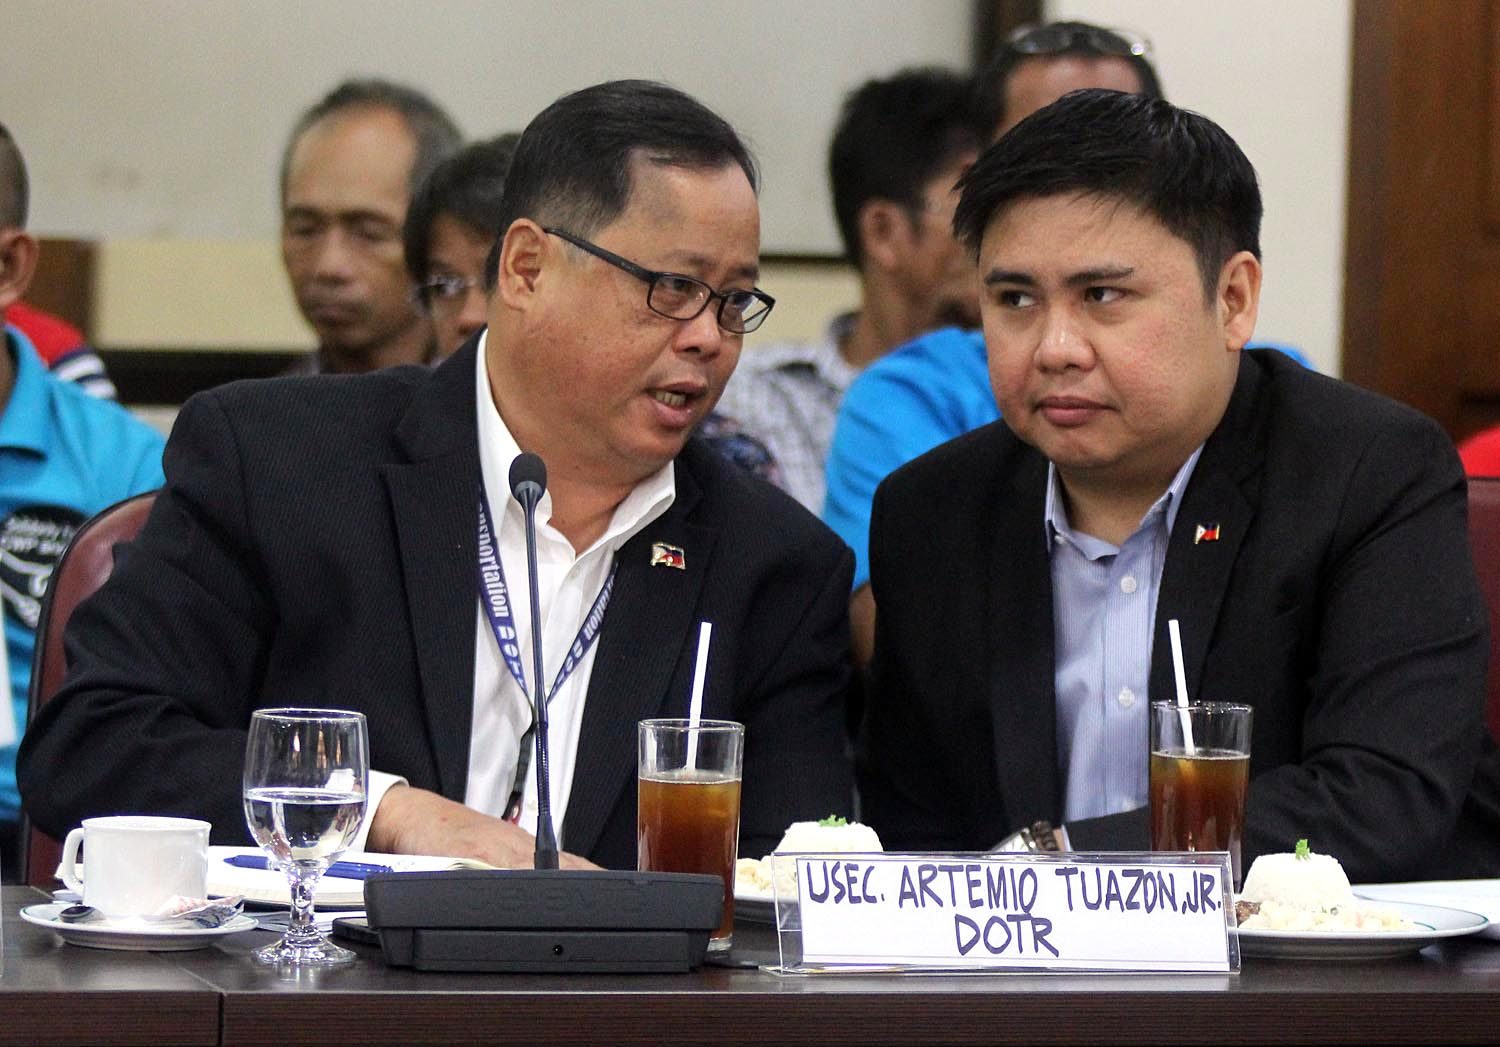 PUV modernization: Planning, readiness issues raised at House hearing